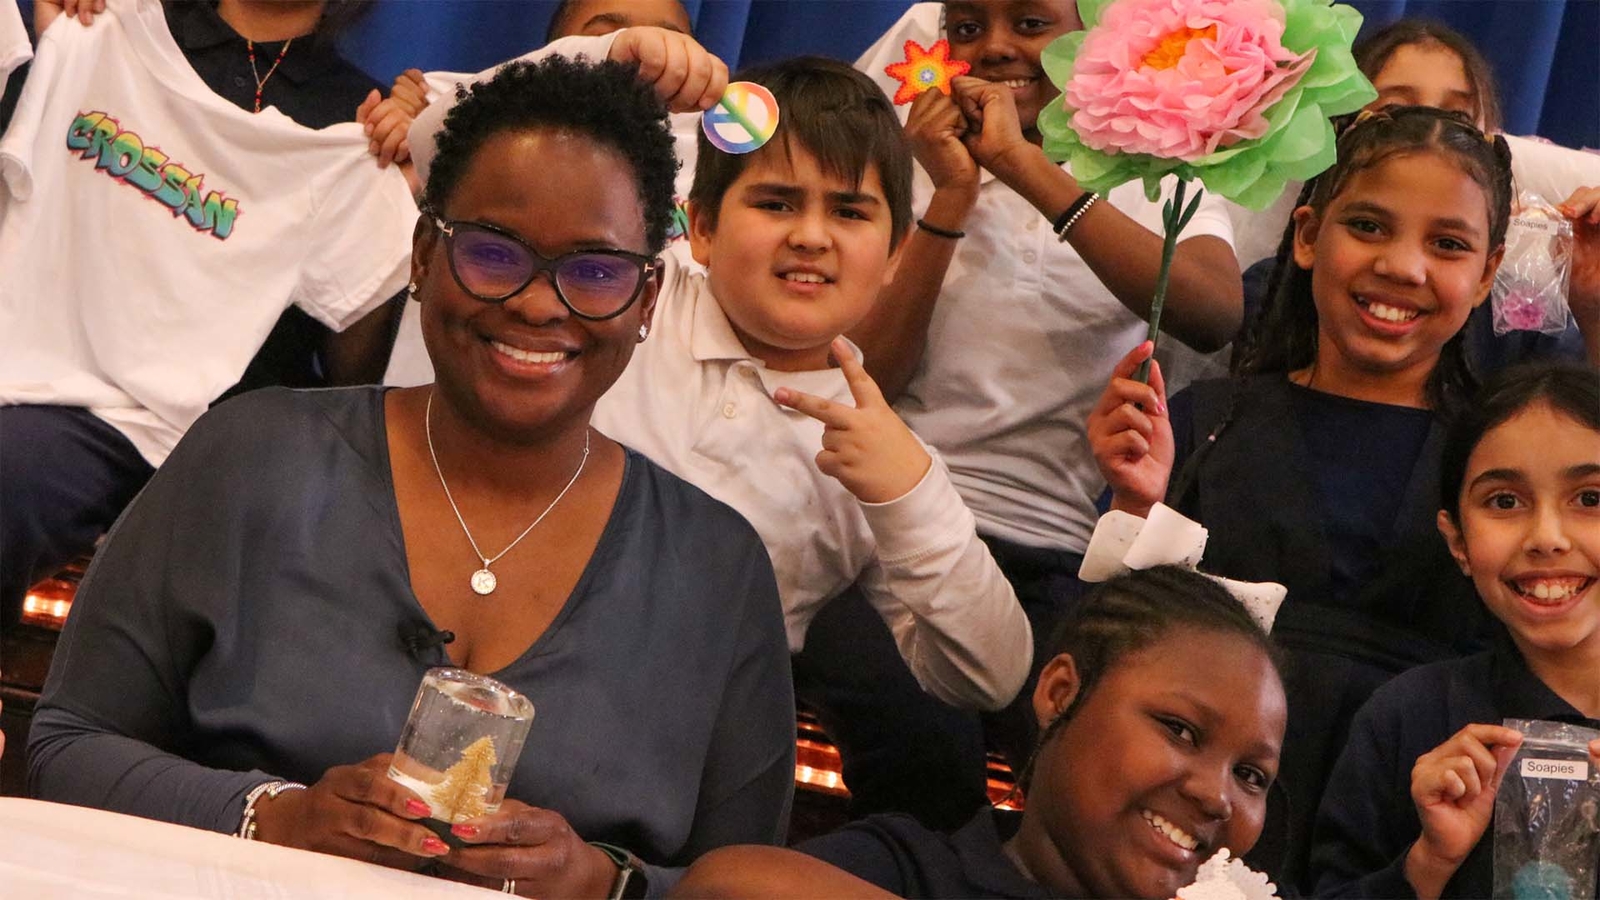 Philly Principal helps students pitch products like true entrepreneurs [Video]